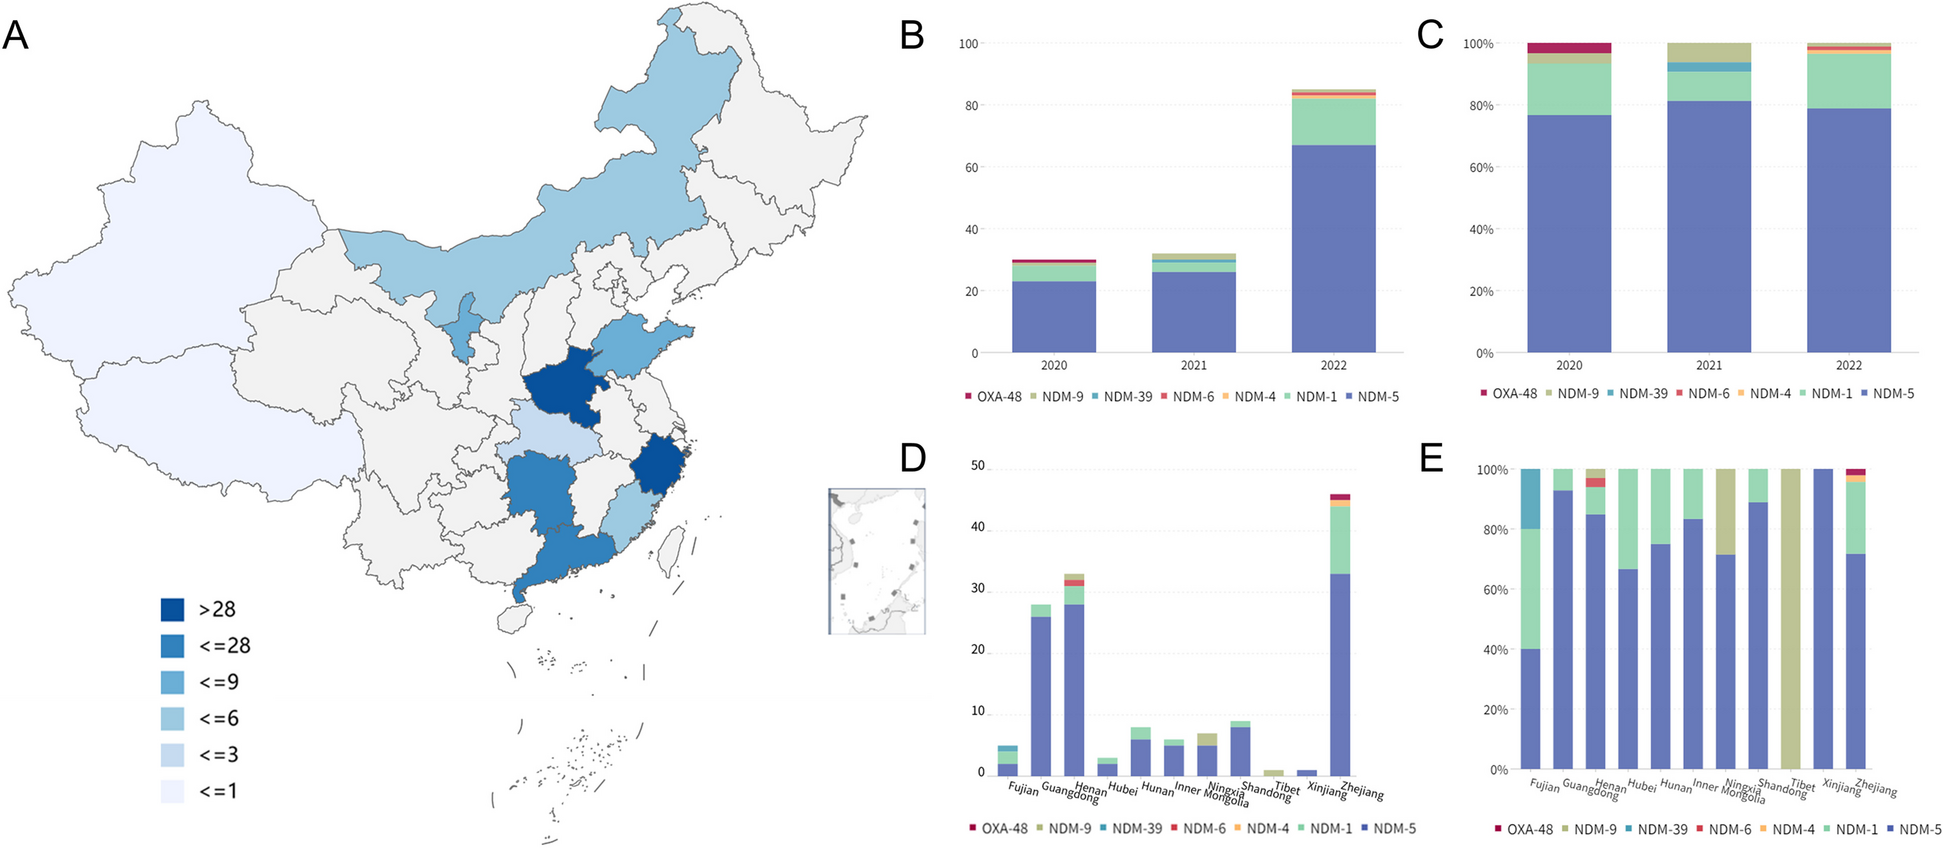 National genomic epidemiology investigation revealed the spread of carbapenem-resistant Escherichia coli in healthy populations and the impact on public health